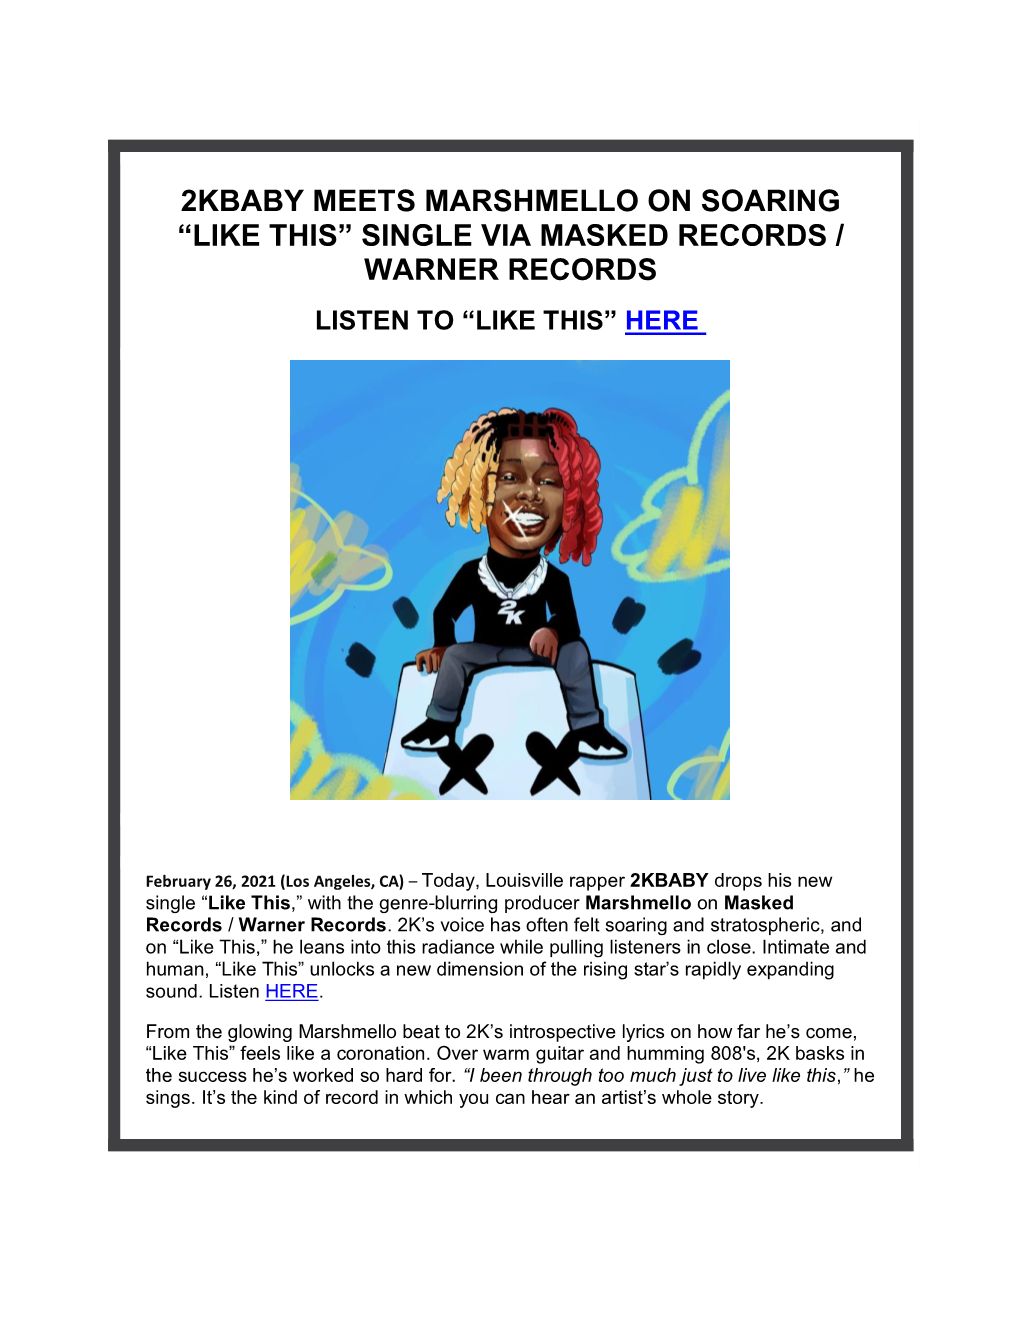 2Kbaby Meets Marshmello on Soaring “Like This” Single Via Masked Records / Warner Records